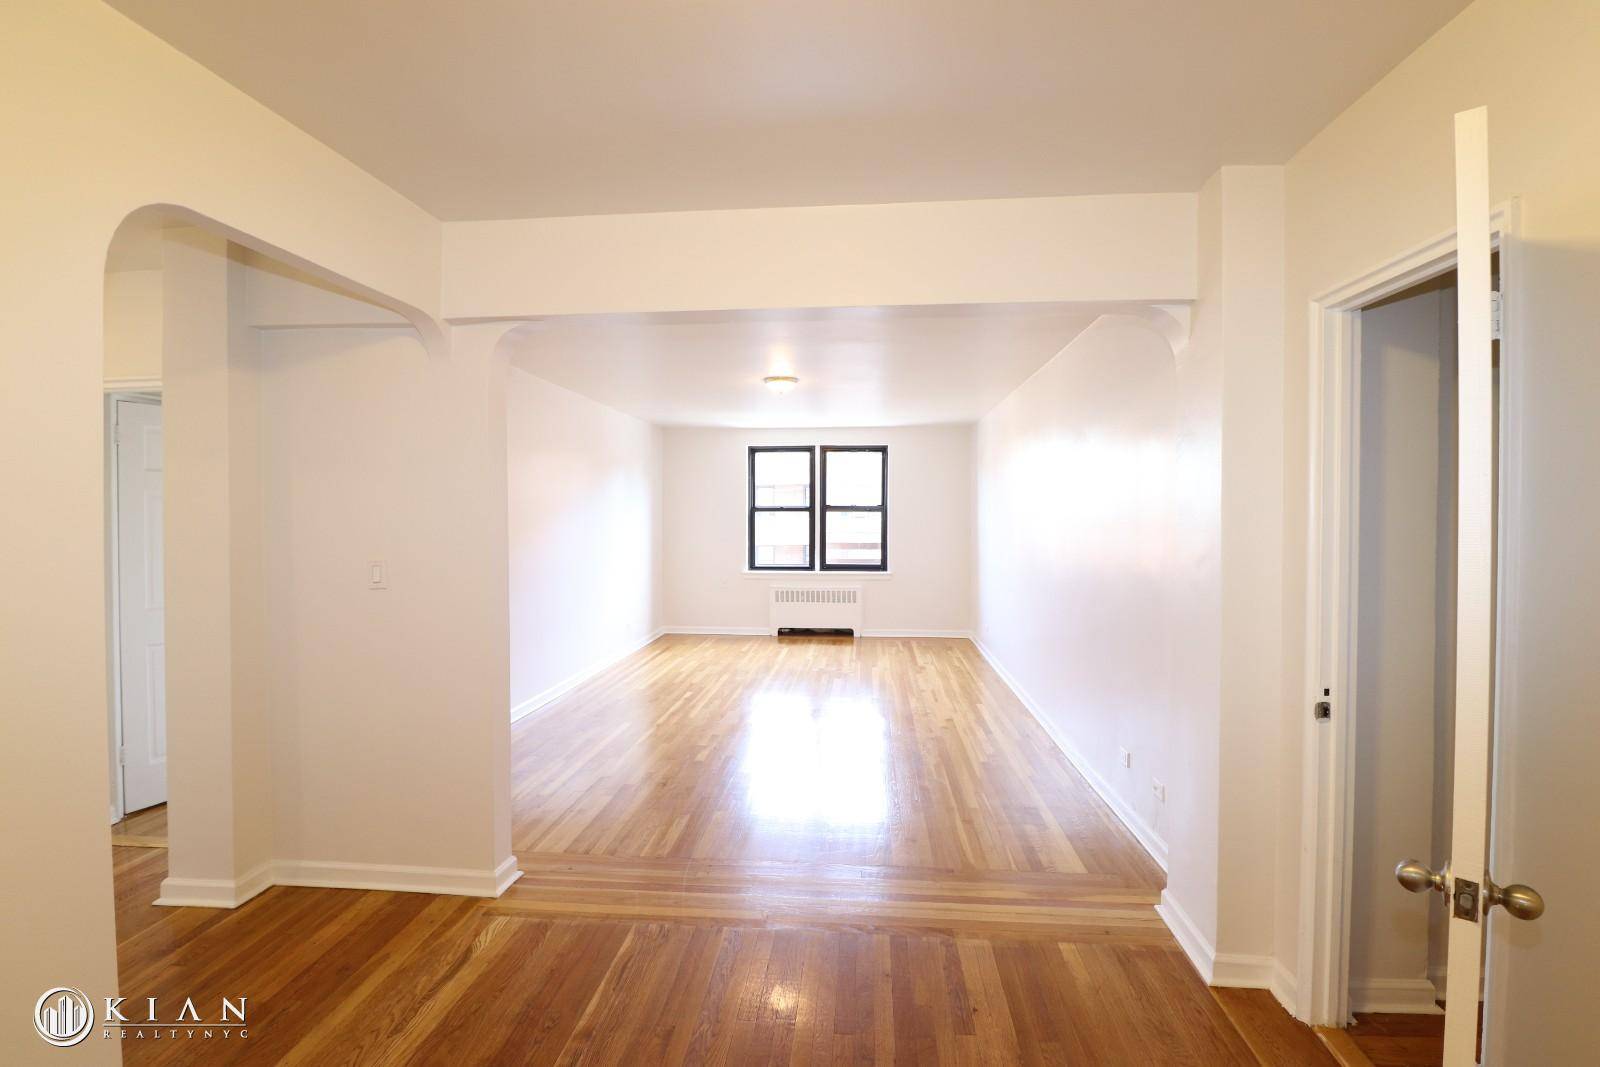 NO BROKER FEE ! Gut renovated apartment with a huge living room, dining area and large foyer.